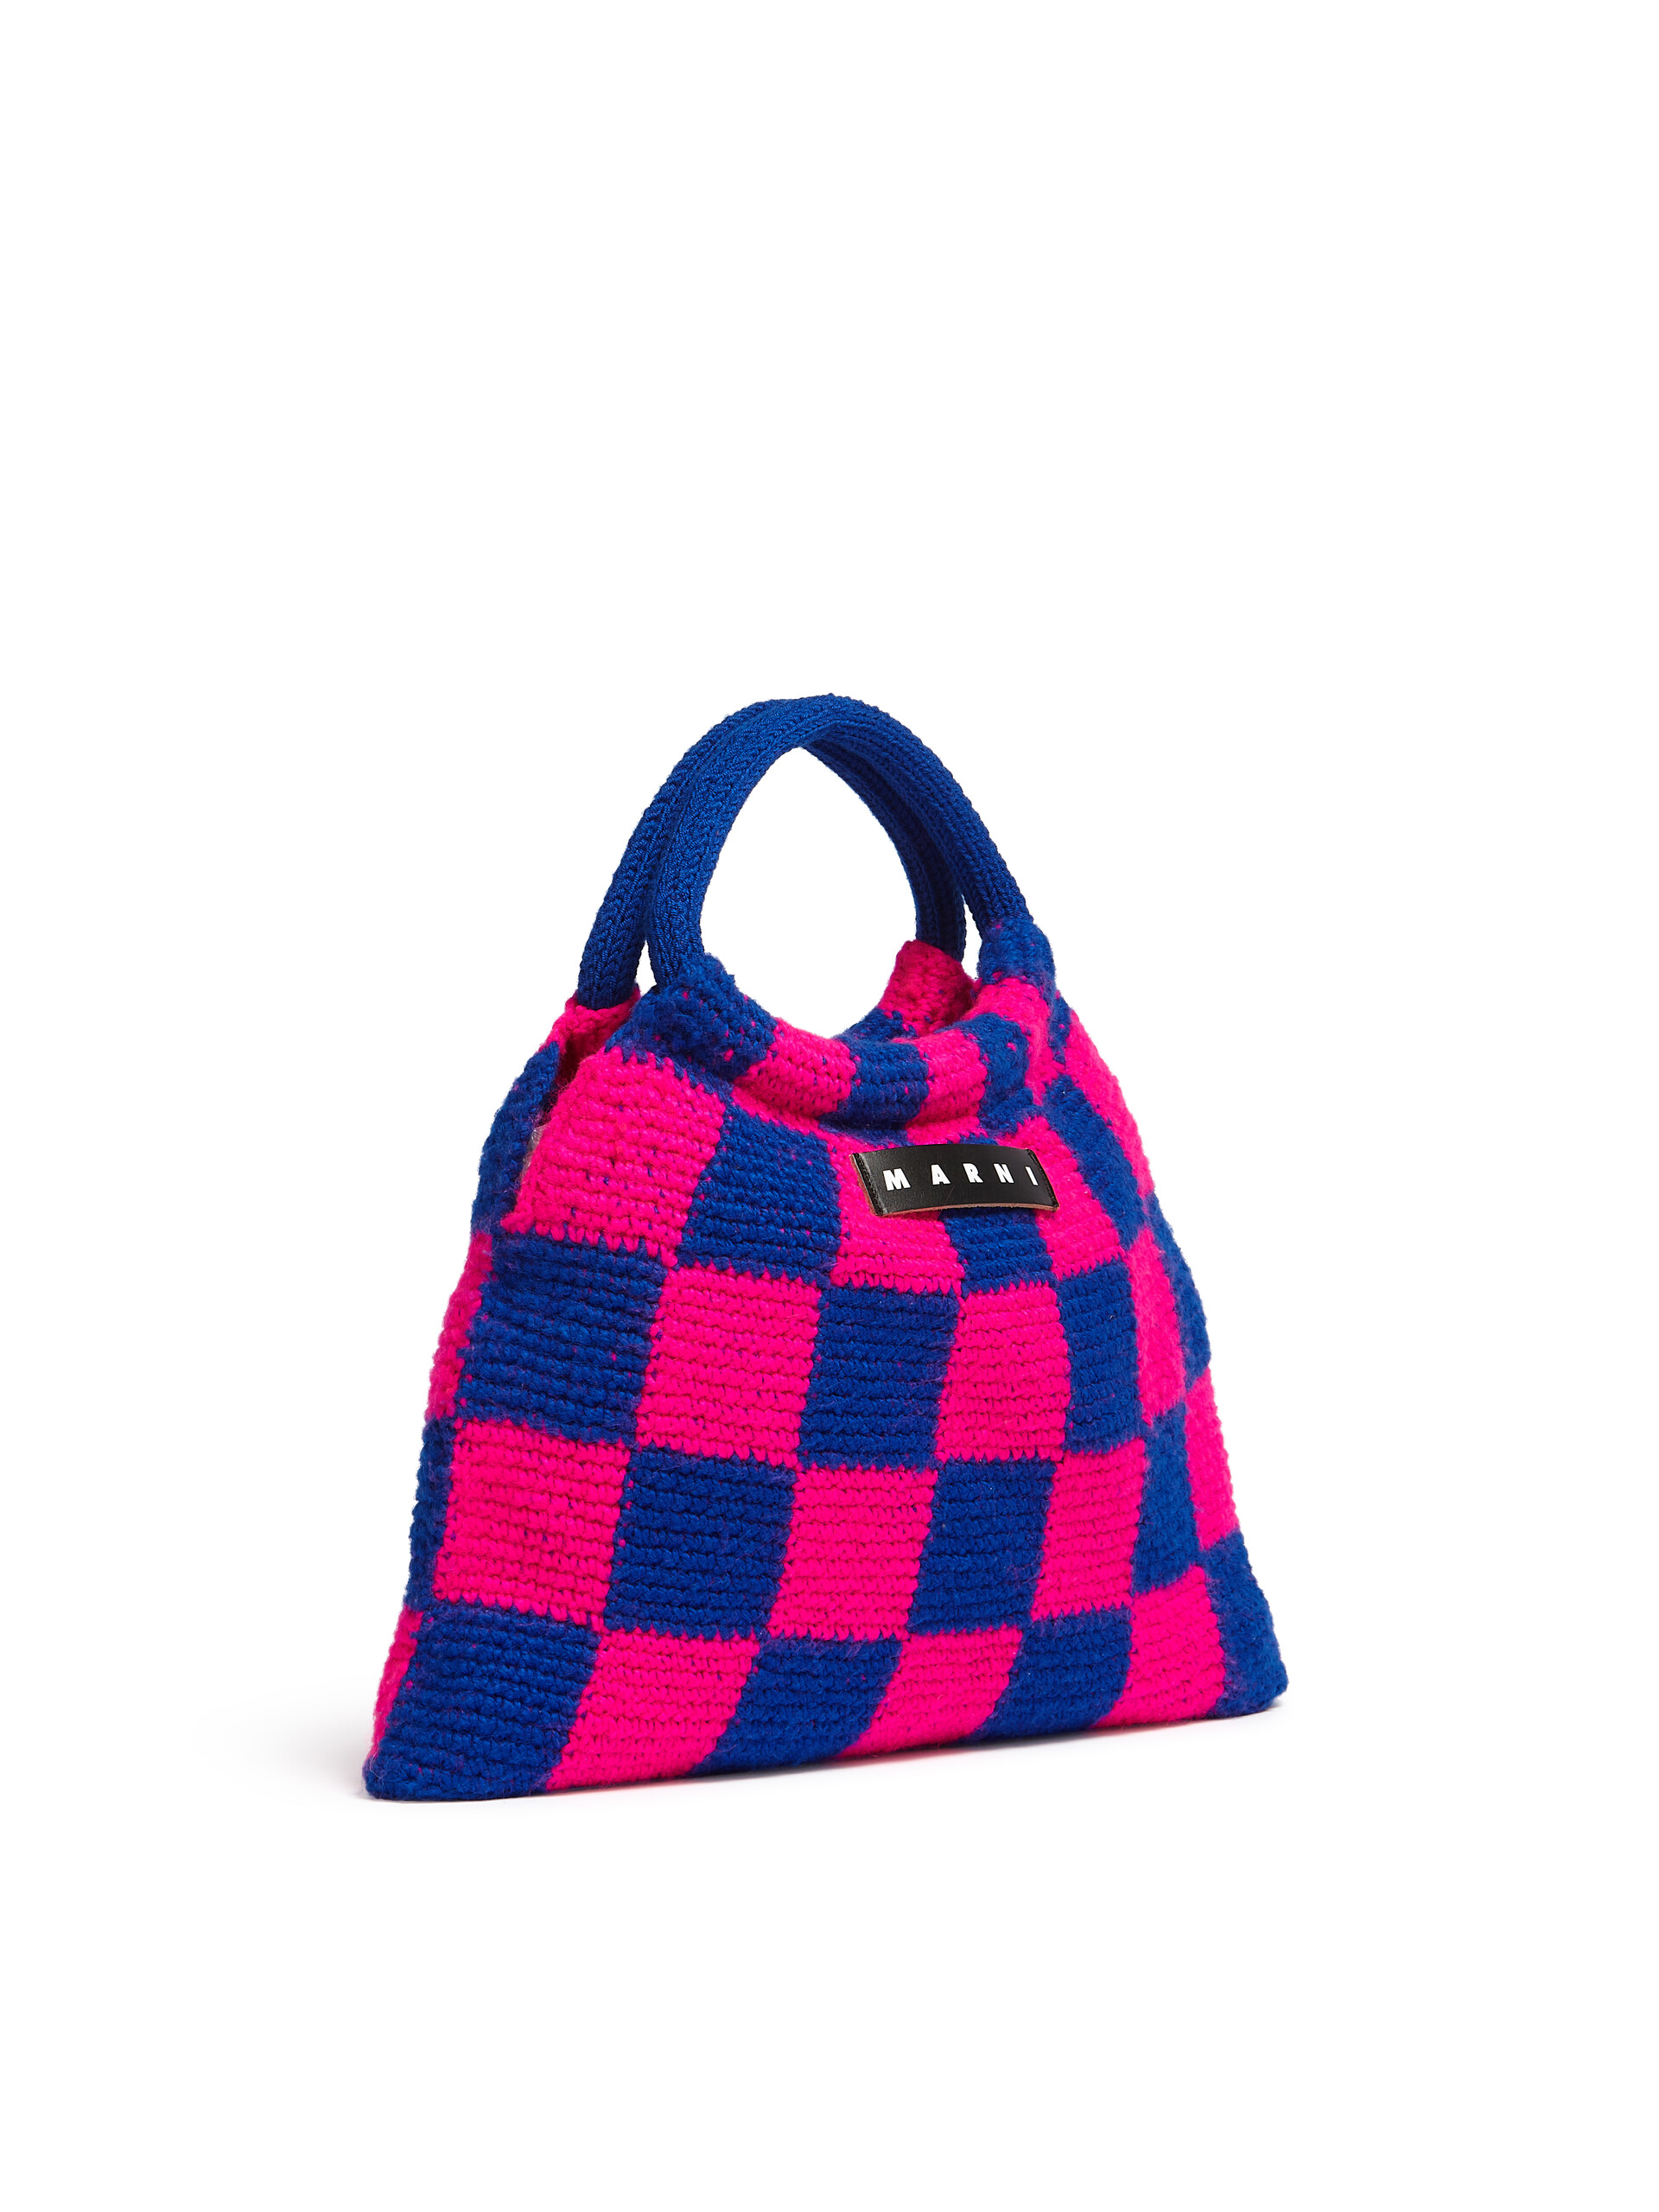 MARNI MARKET GRANNY bag in pink and blue crochet - Shopping Bags - Image 2